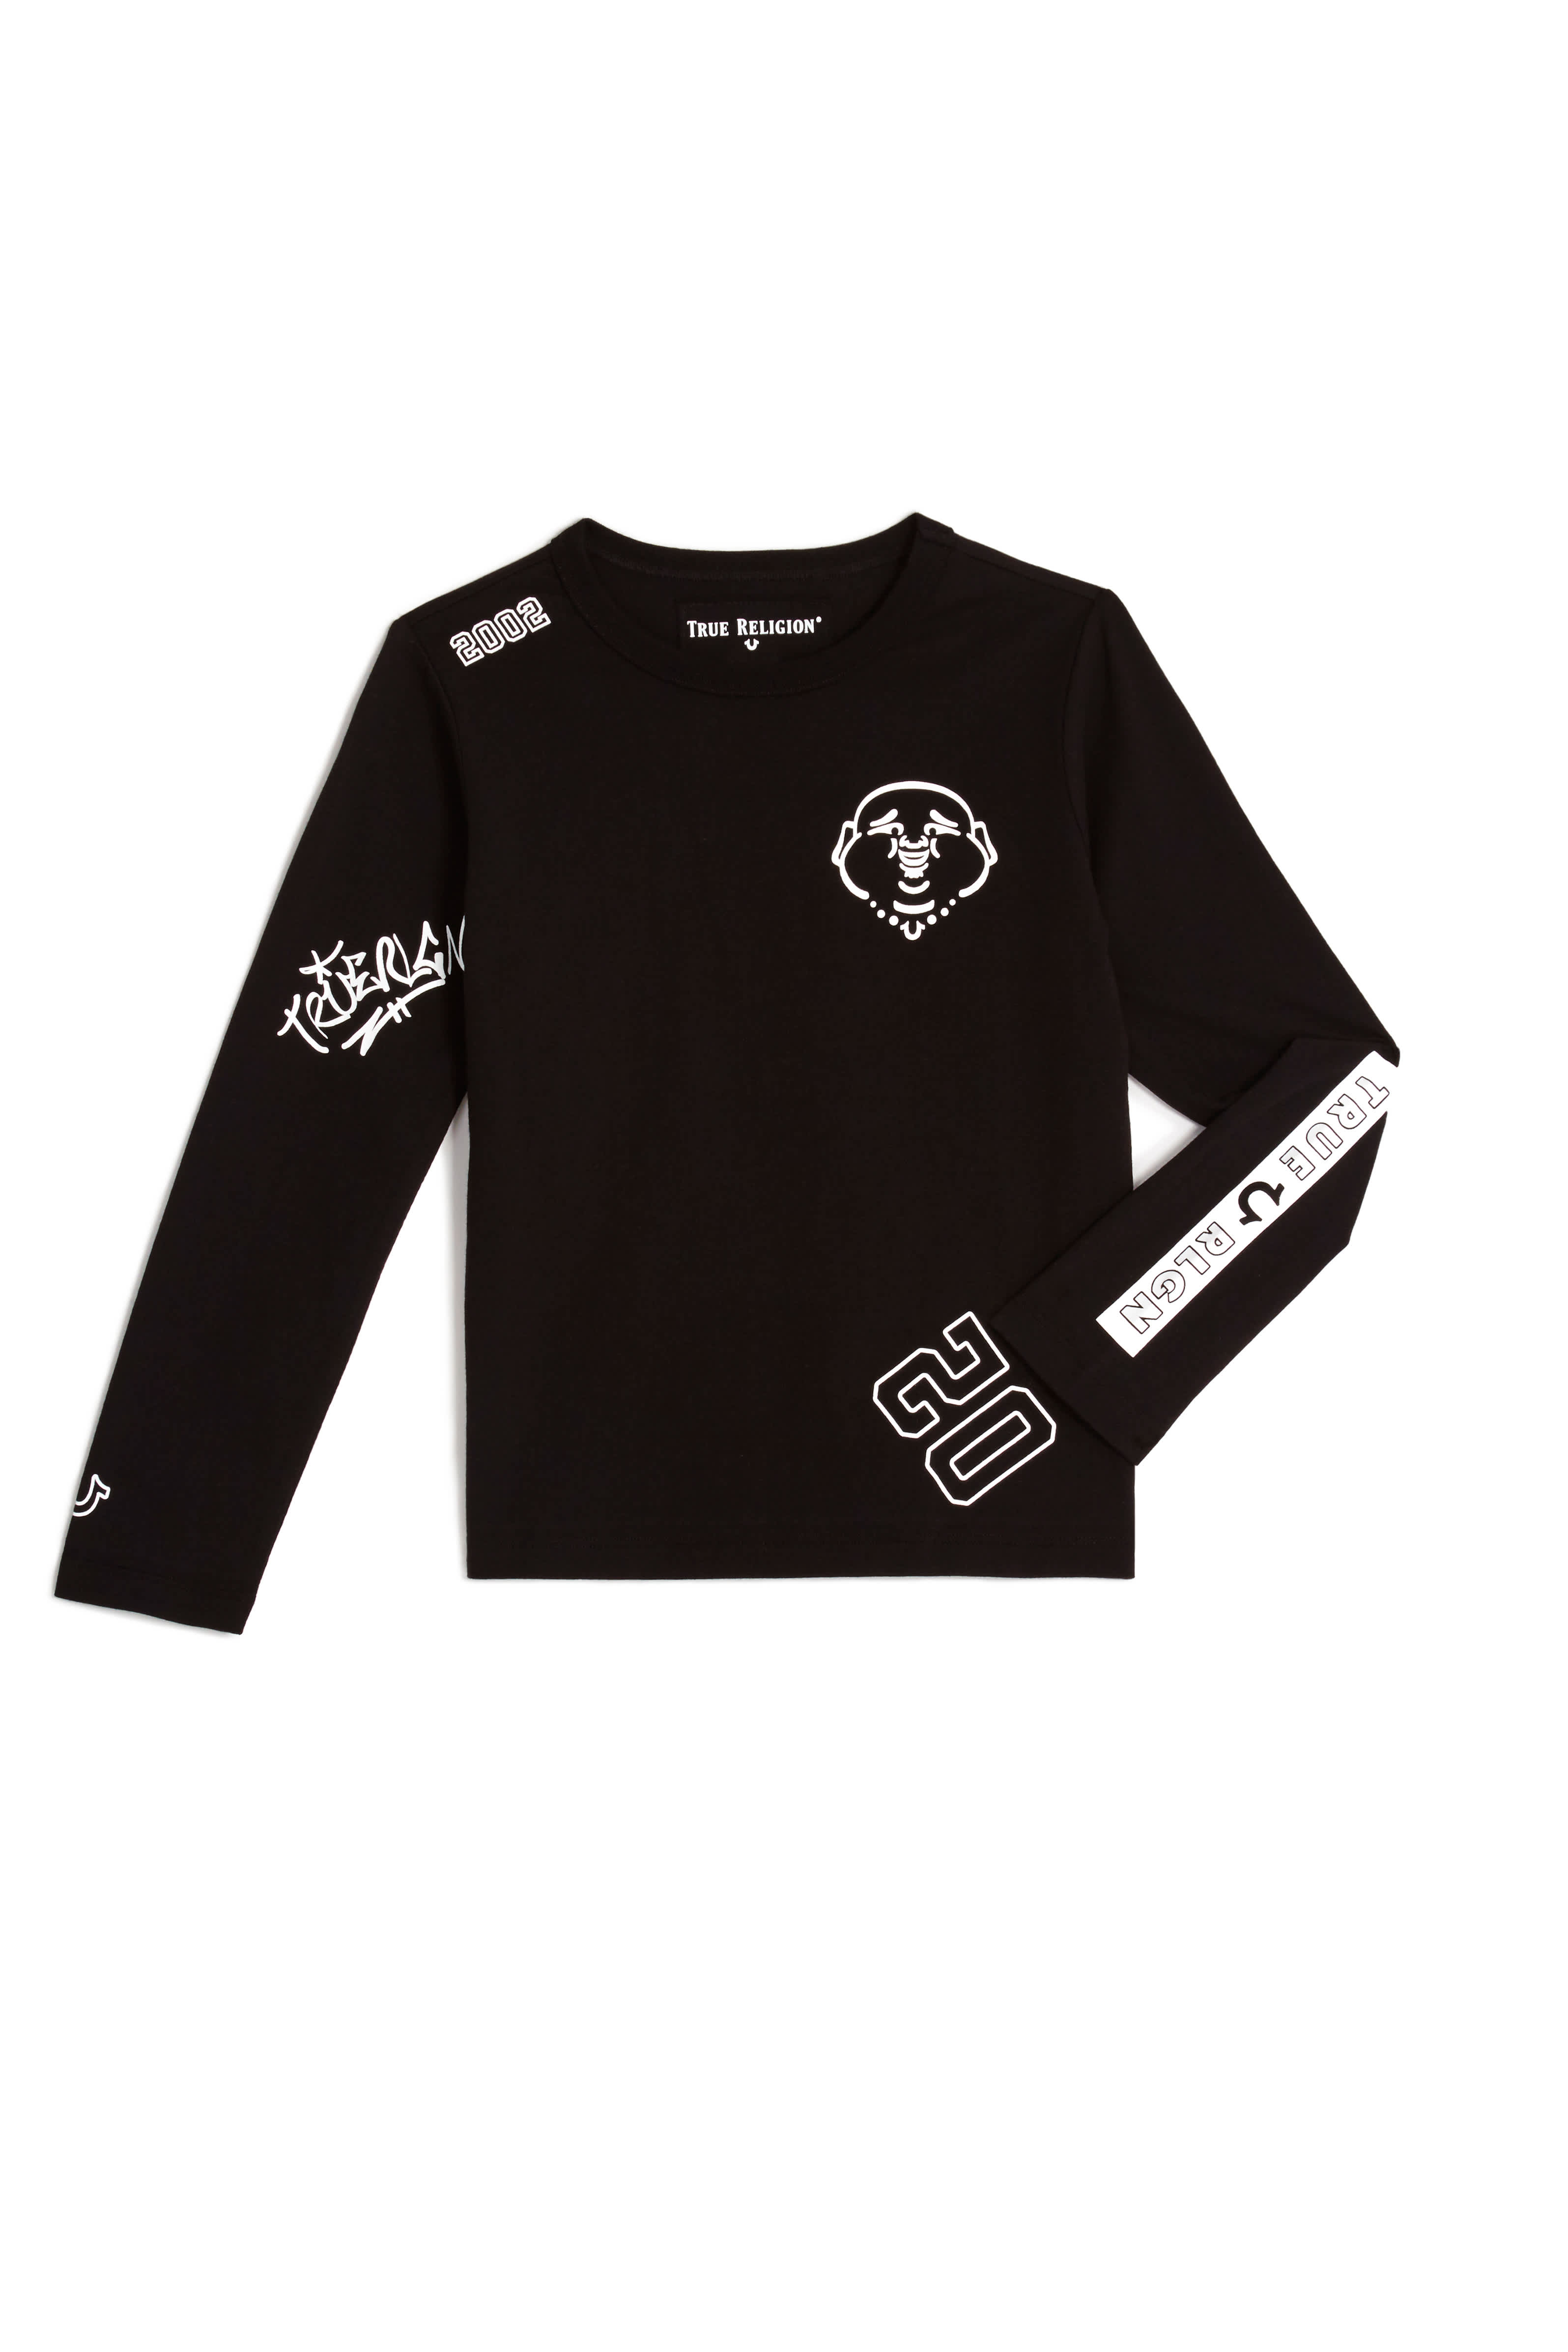 TODDLER/LITTLE KIDS TAGGED GRAPHIC LONG SLEEVE SHIRT